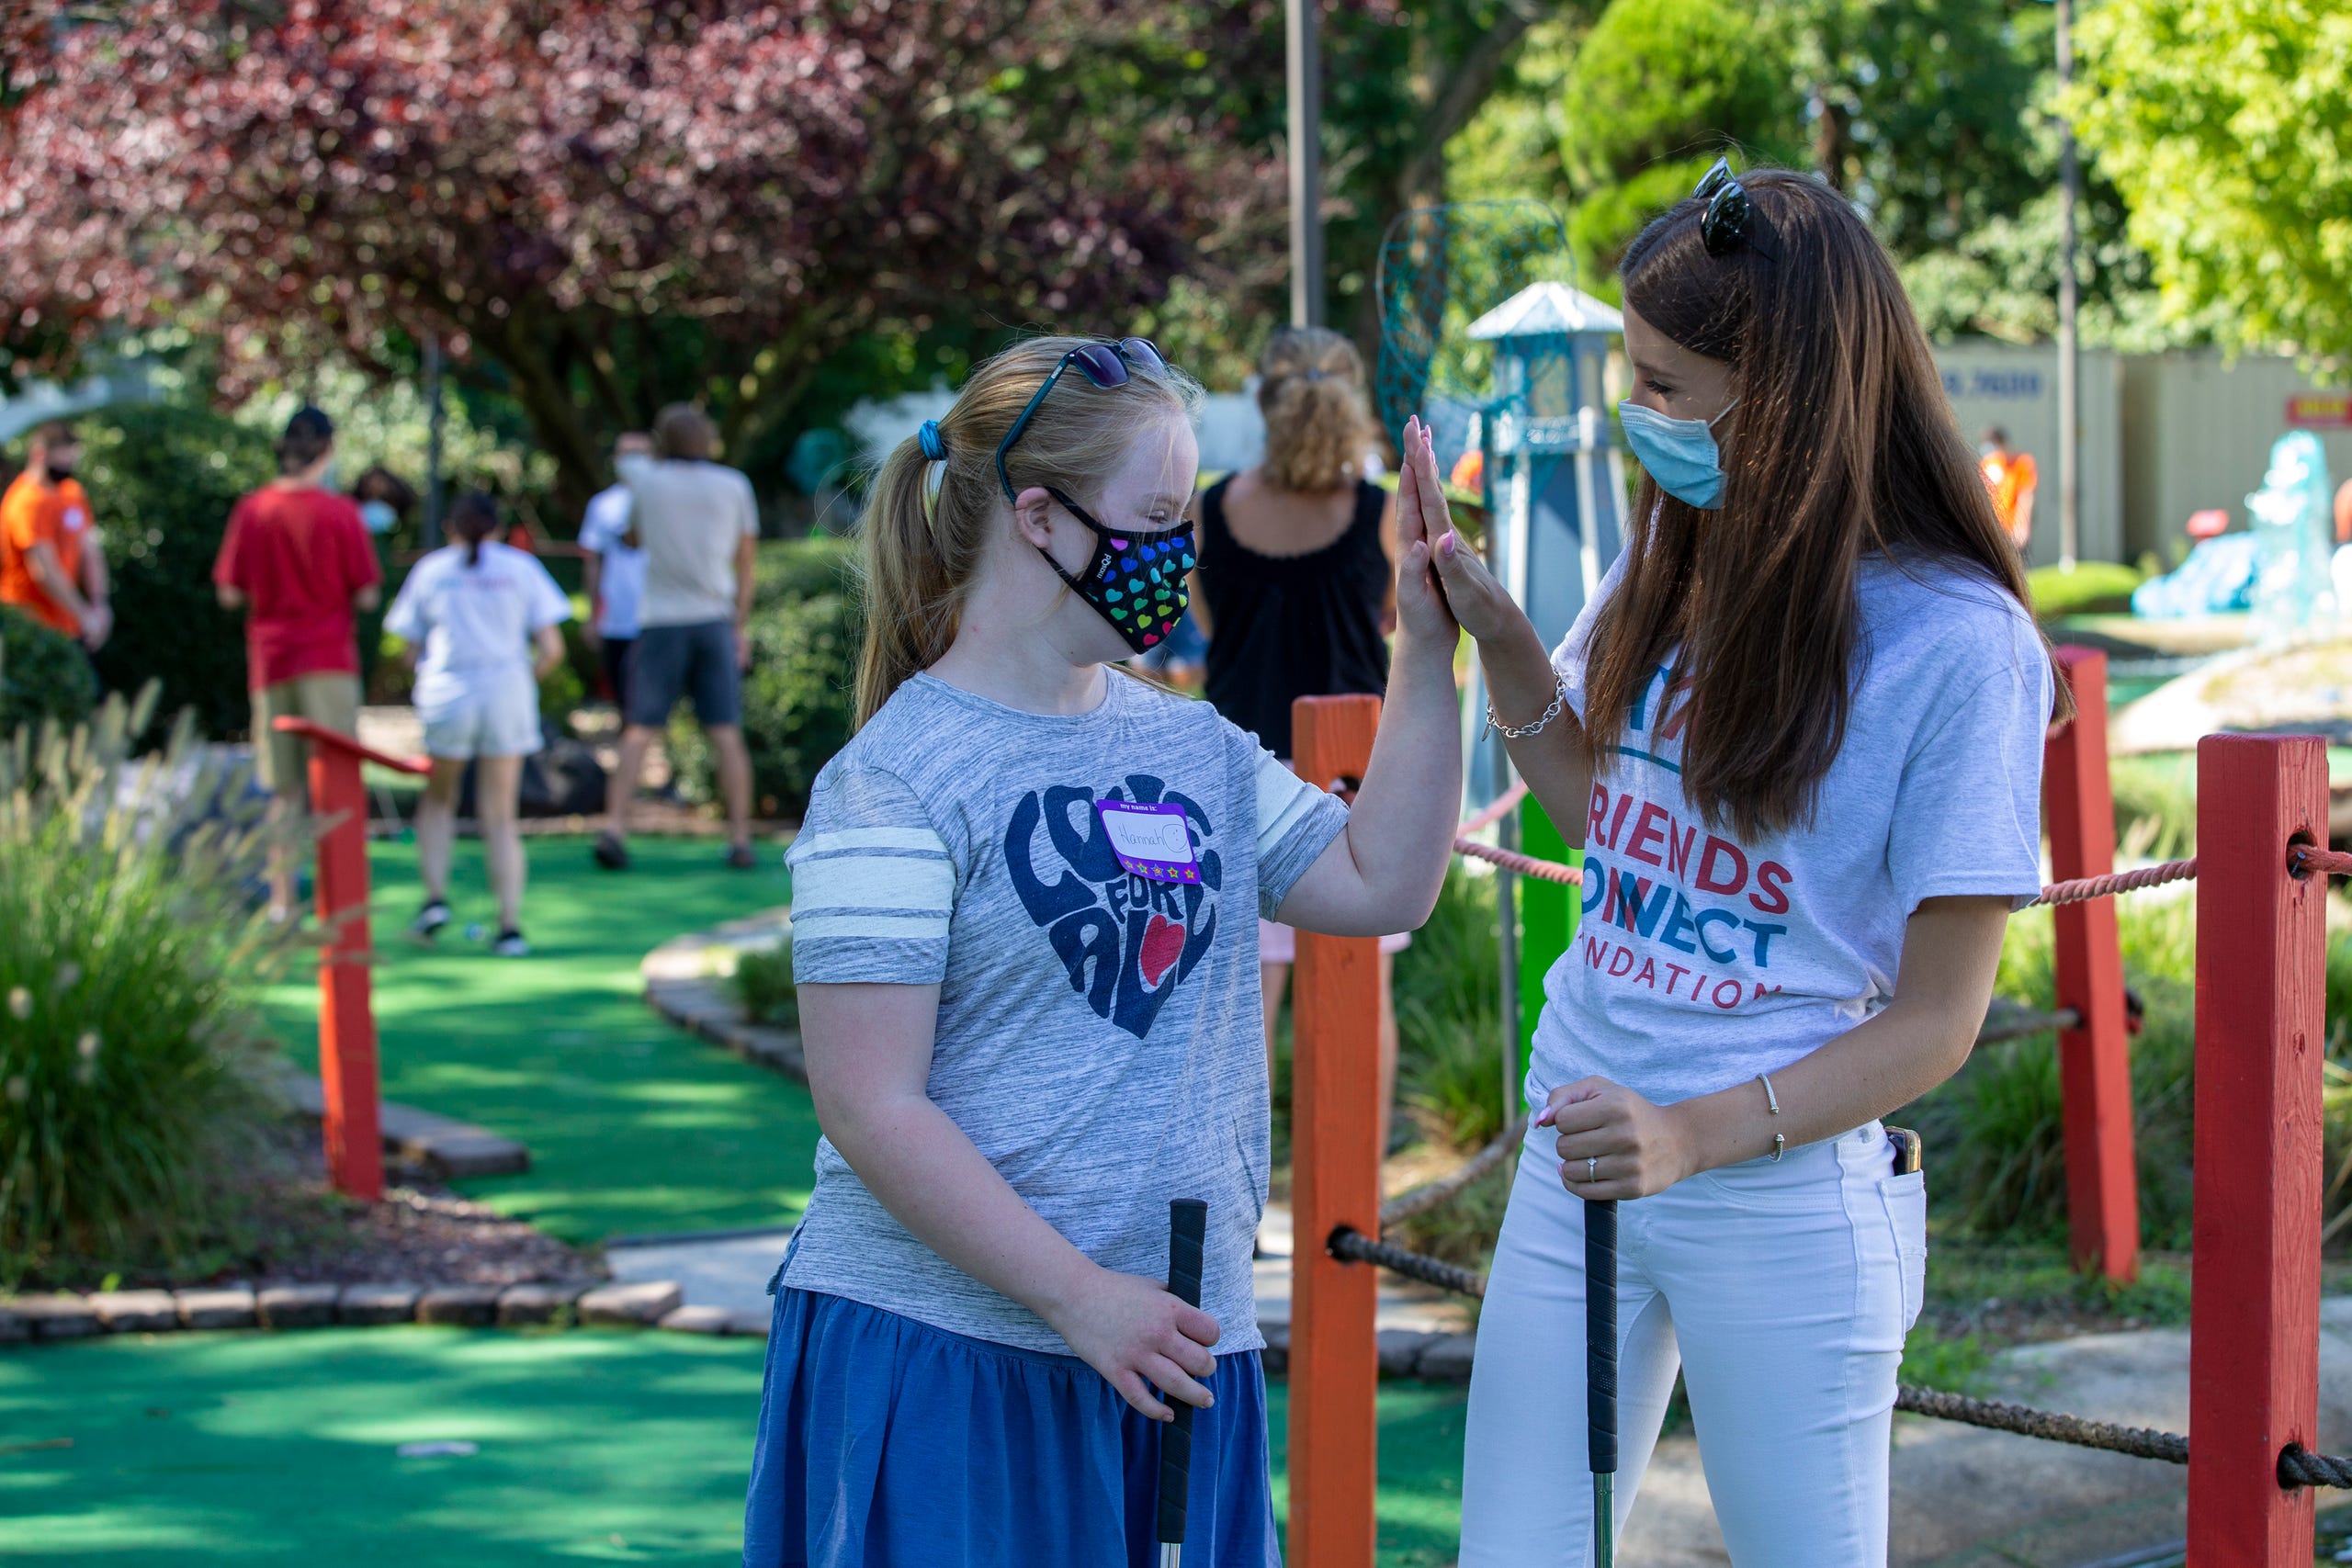 (right) Sophia Ziajski, 19, of Middletown, who runs the nonprofit Friends Connect Foundation, high fives (left) Hannah Piasecki, 13, of Middletown as members of the Middletown North boys soccer team play mini-golf with a group of special-needs kids as part of Friends Connect Foundation at TST BBQ & Mini Golf in Middletown, NJ Tuesday, August 18, 2020.